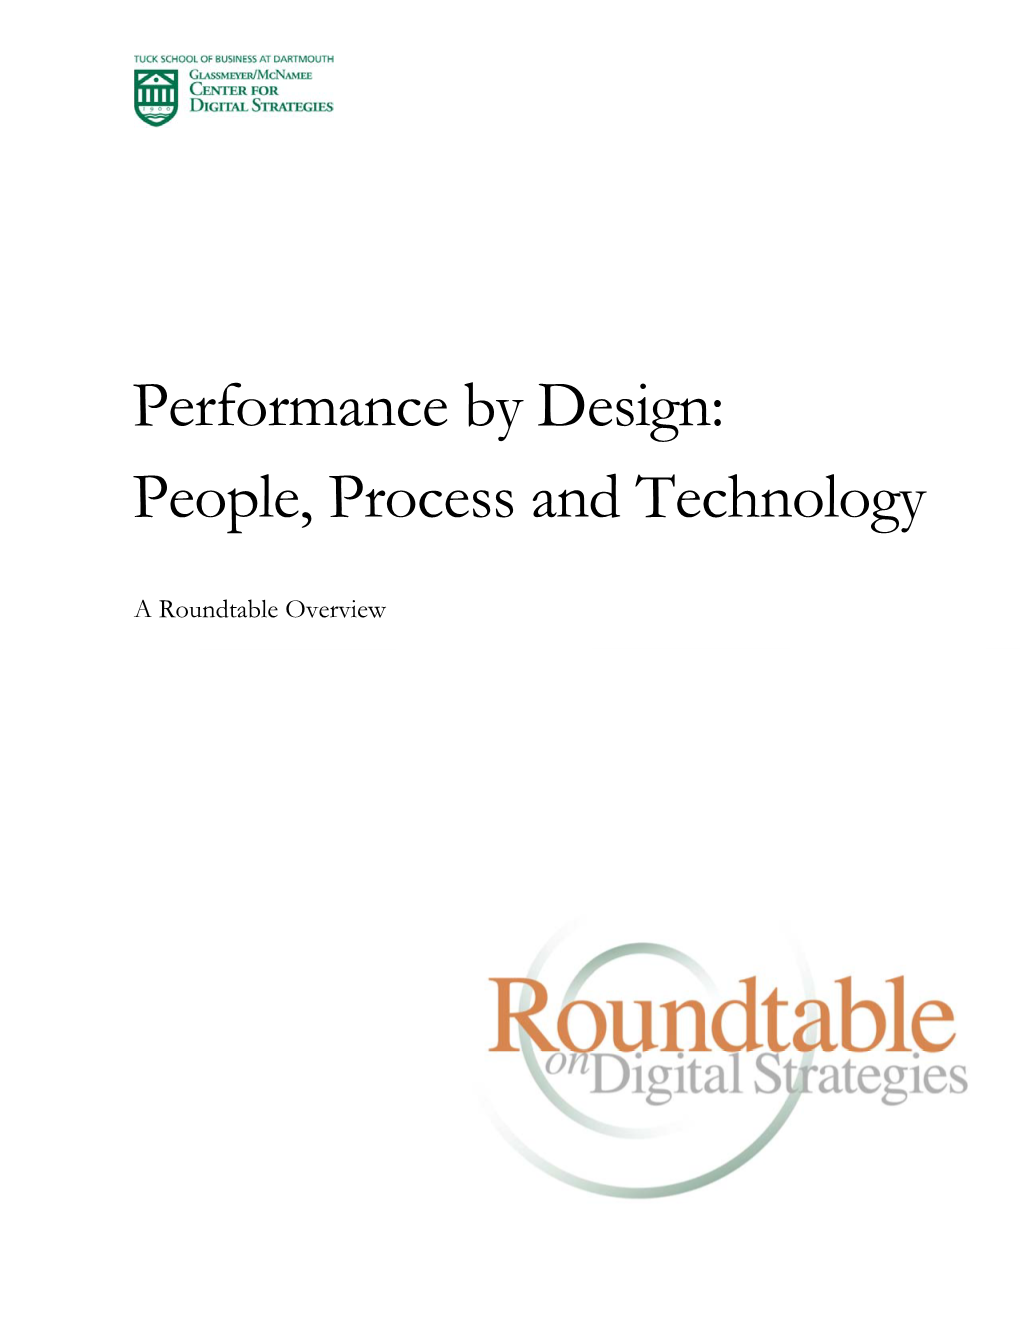 Performance by Design: People, Process and Technology